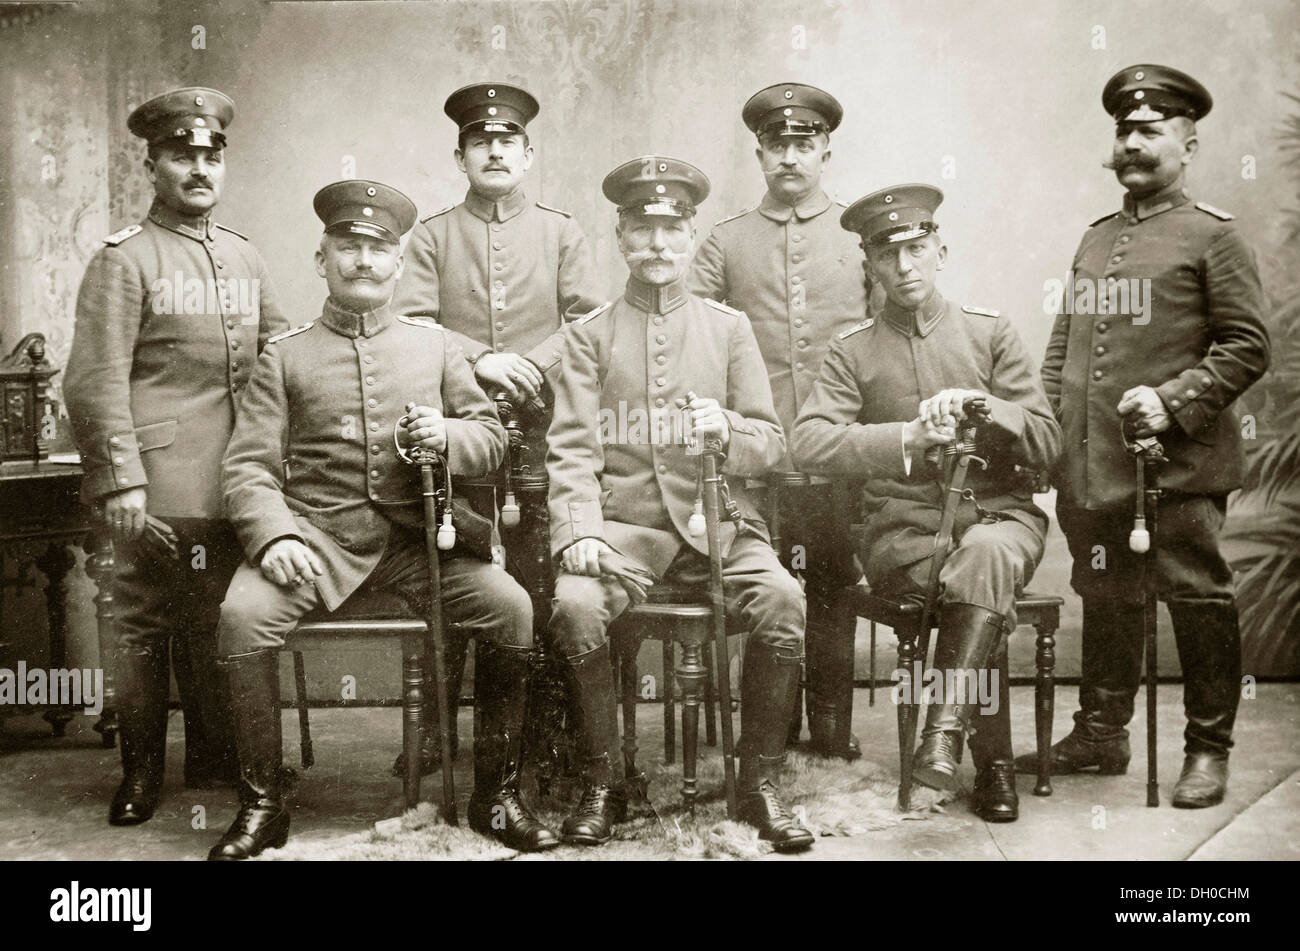 Group picture, Prussian infantry petty officers wearing full dress uniforms, at the outbreak of World War I, around 1914 Stock Photo